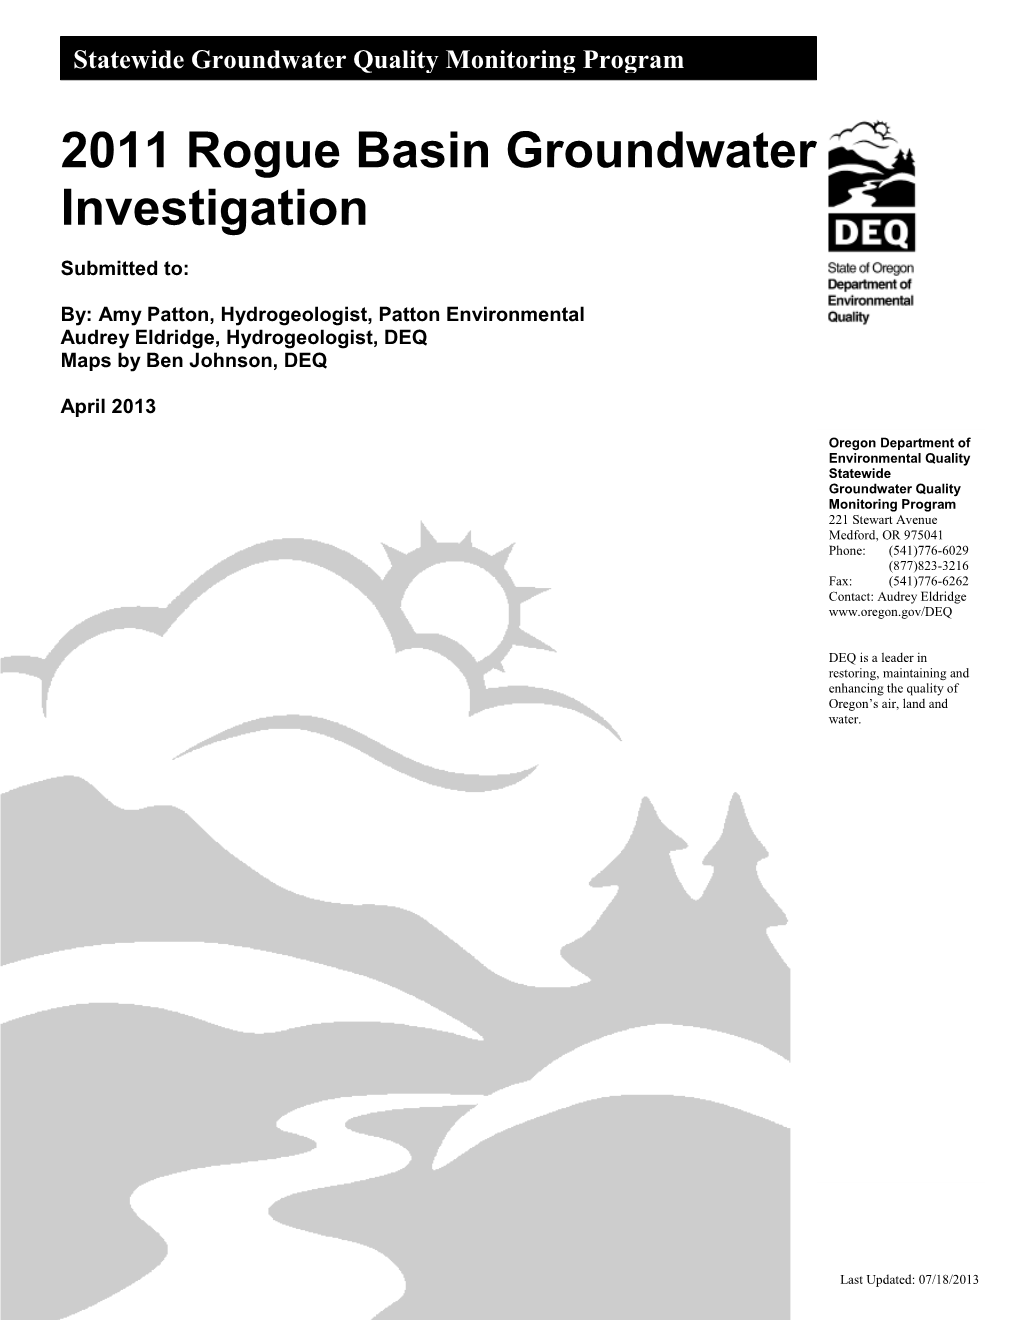 2011 Rogue Basin Groundwater Investigation